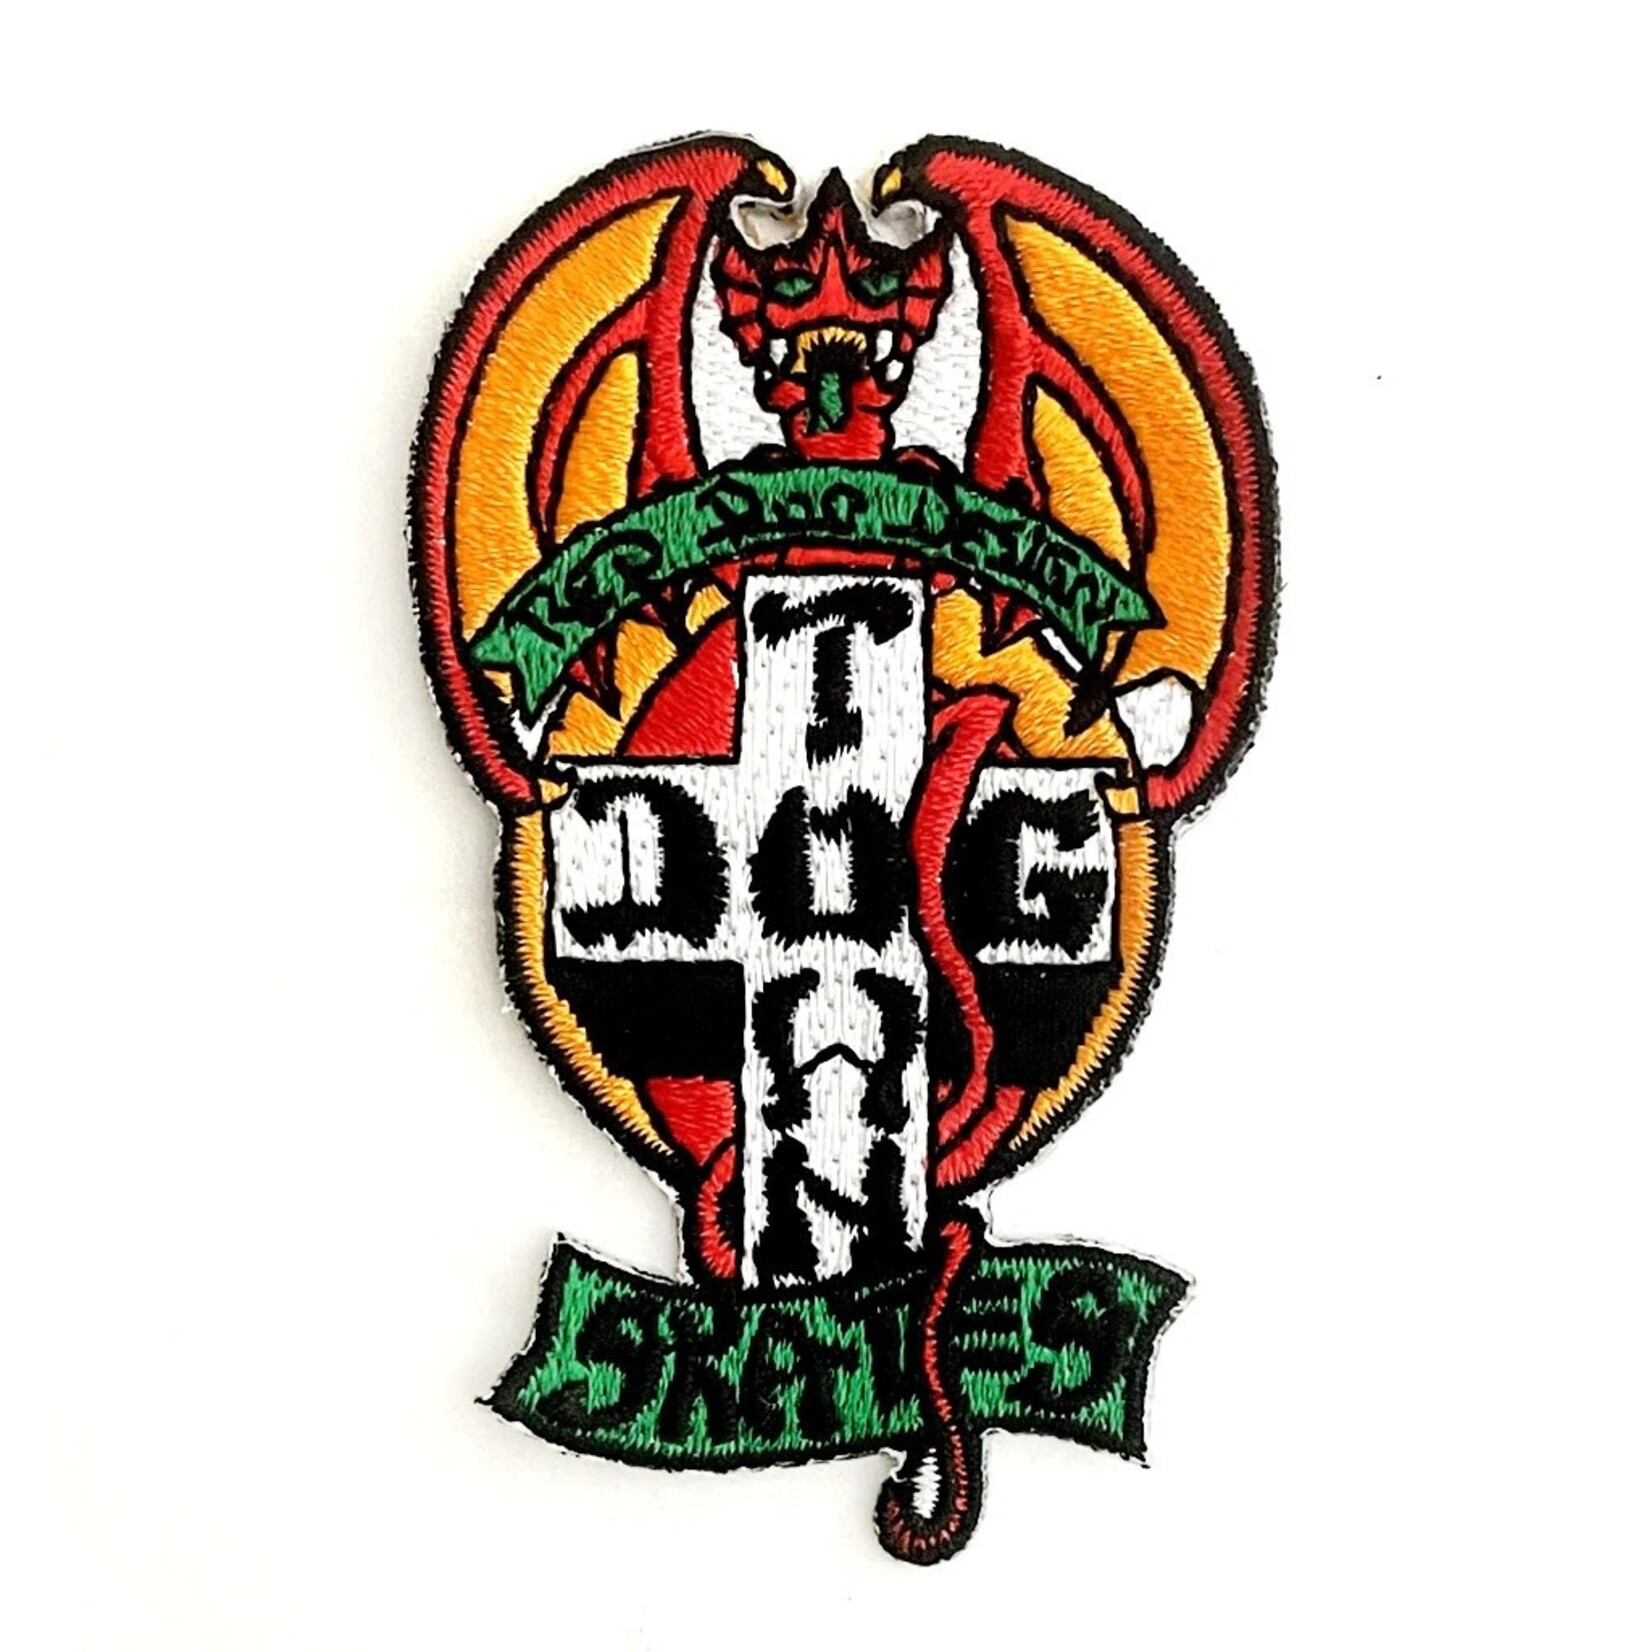 Dogtown Dogtown Red Dog OG 70s Patch 2.75" x 1.75" - Green / Orange Wings